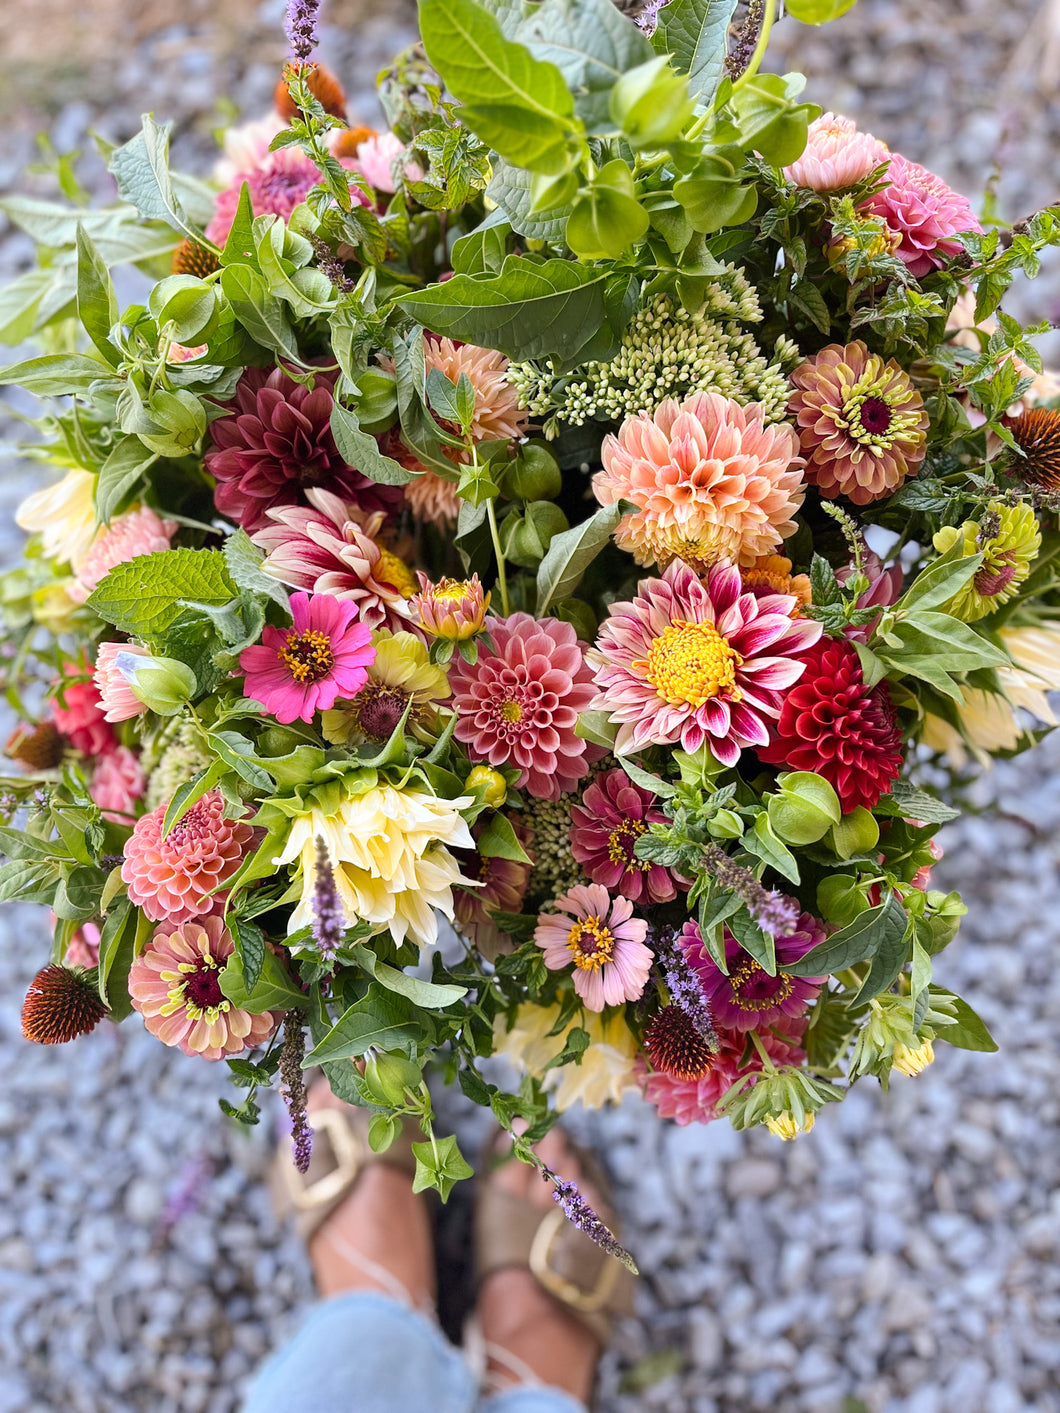 The Year of Flowers - Monthly Bouquets from April to September